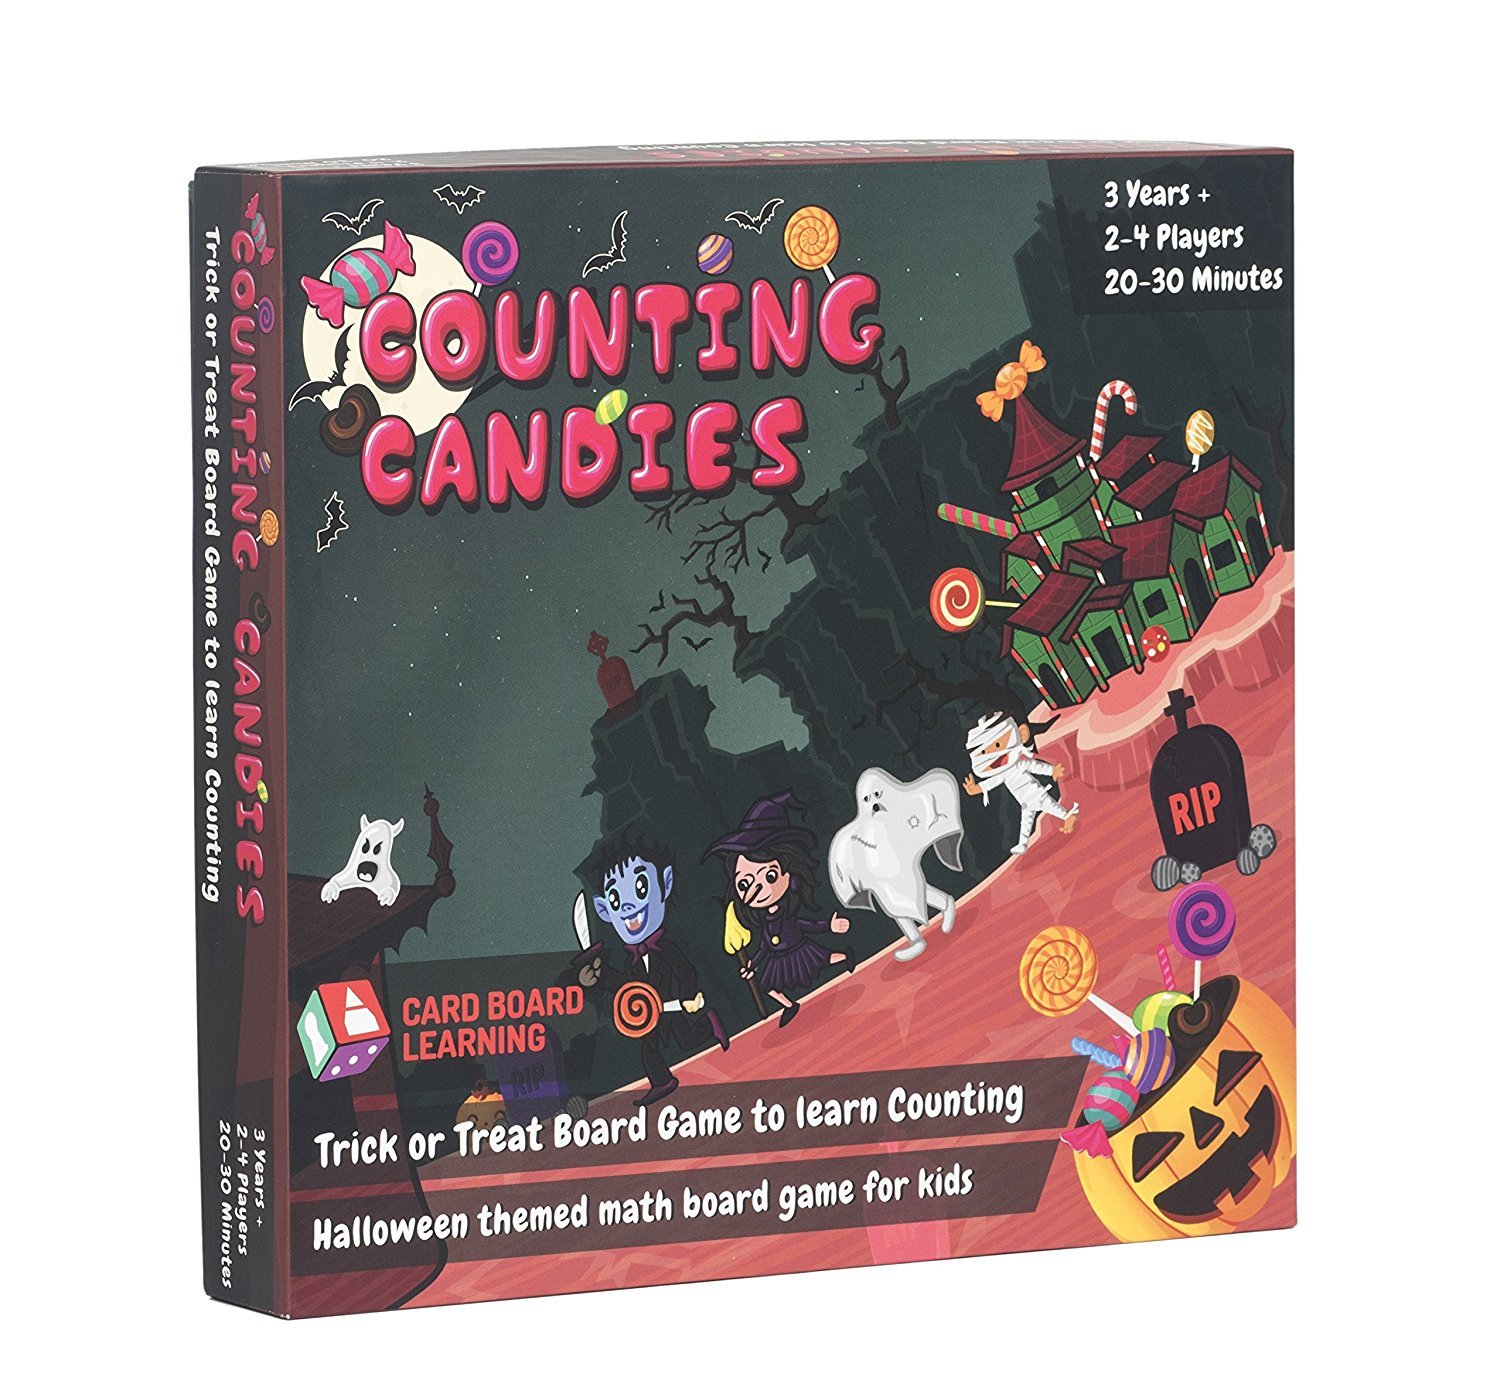 Counting Board Game for Kids - Counting Candies STEM Gift for Kids 4 Years and Above.